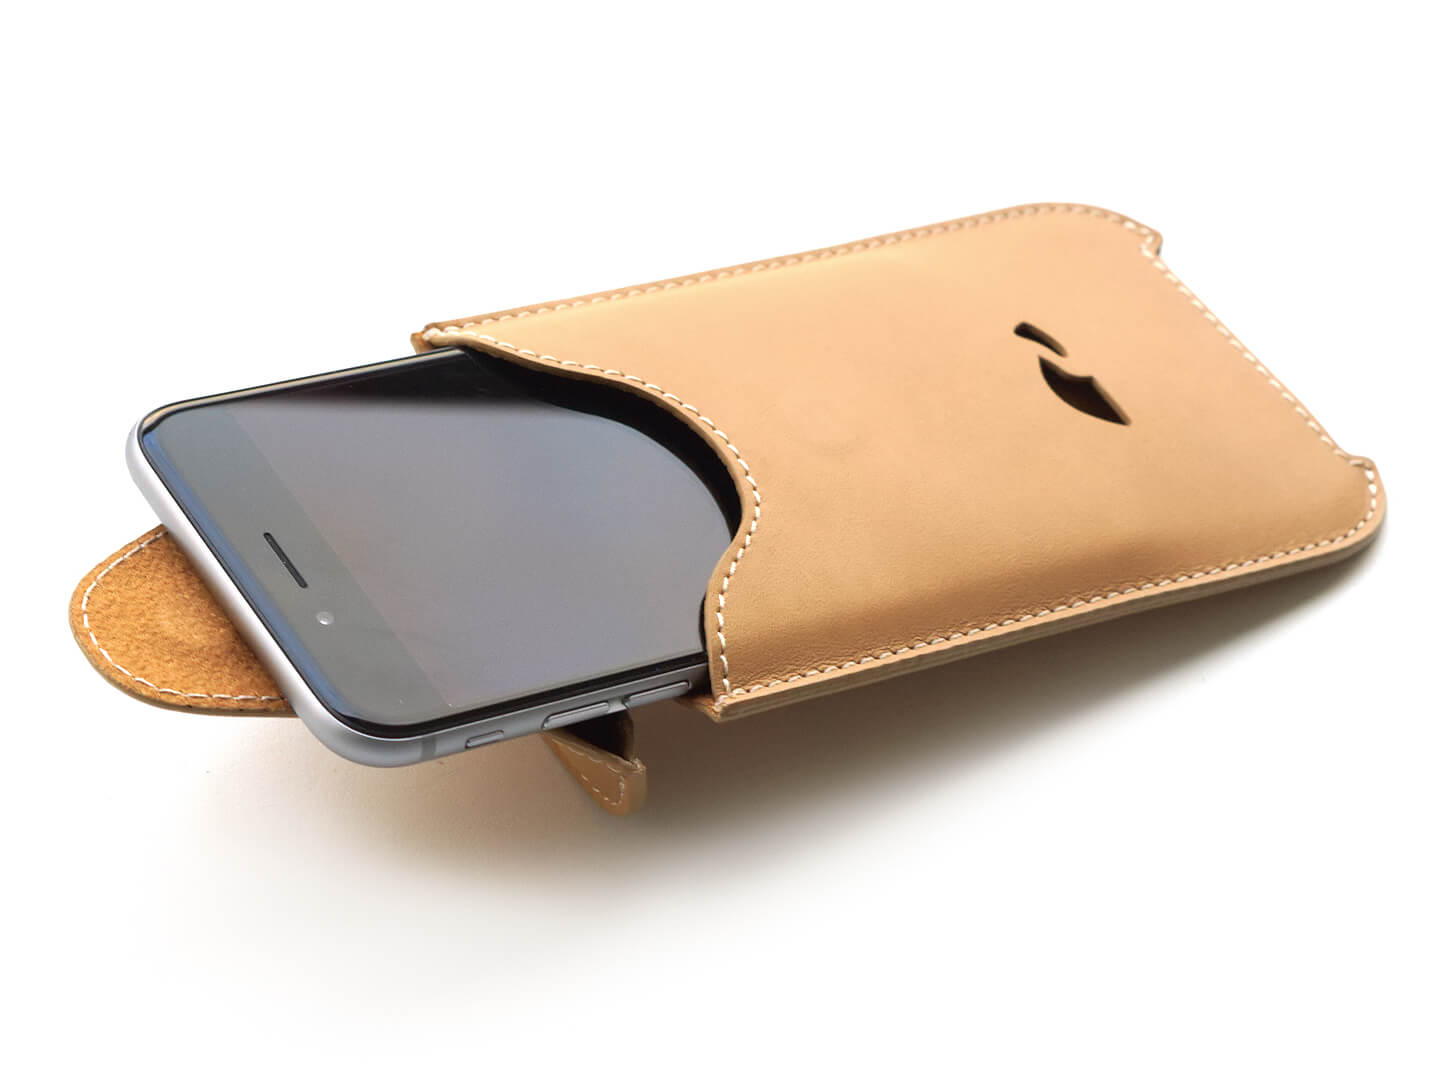 Leather pouch iPhone 6/7/8 Plus - sleeve case - slim - camel - Carapaz